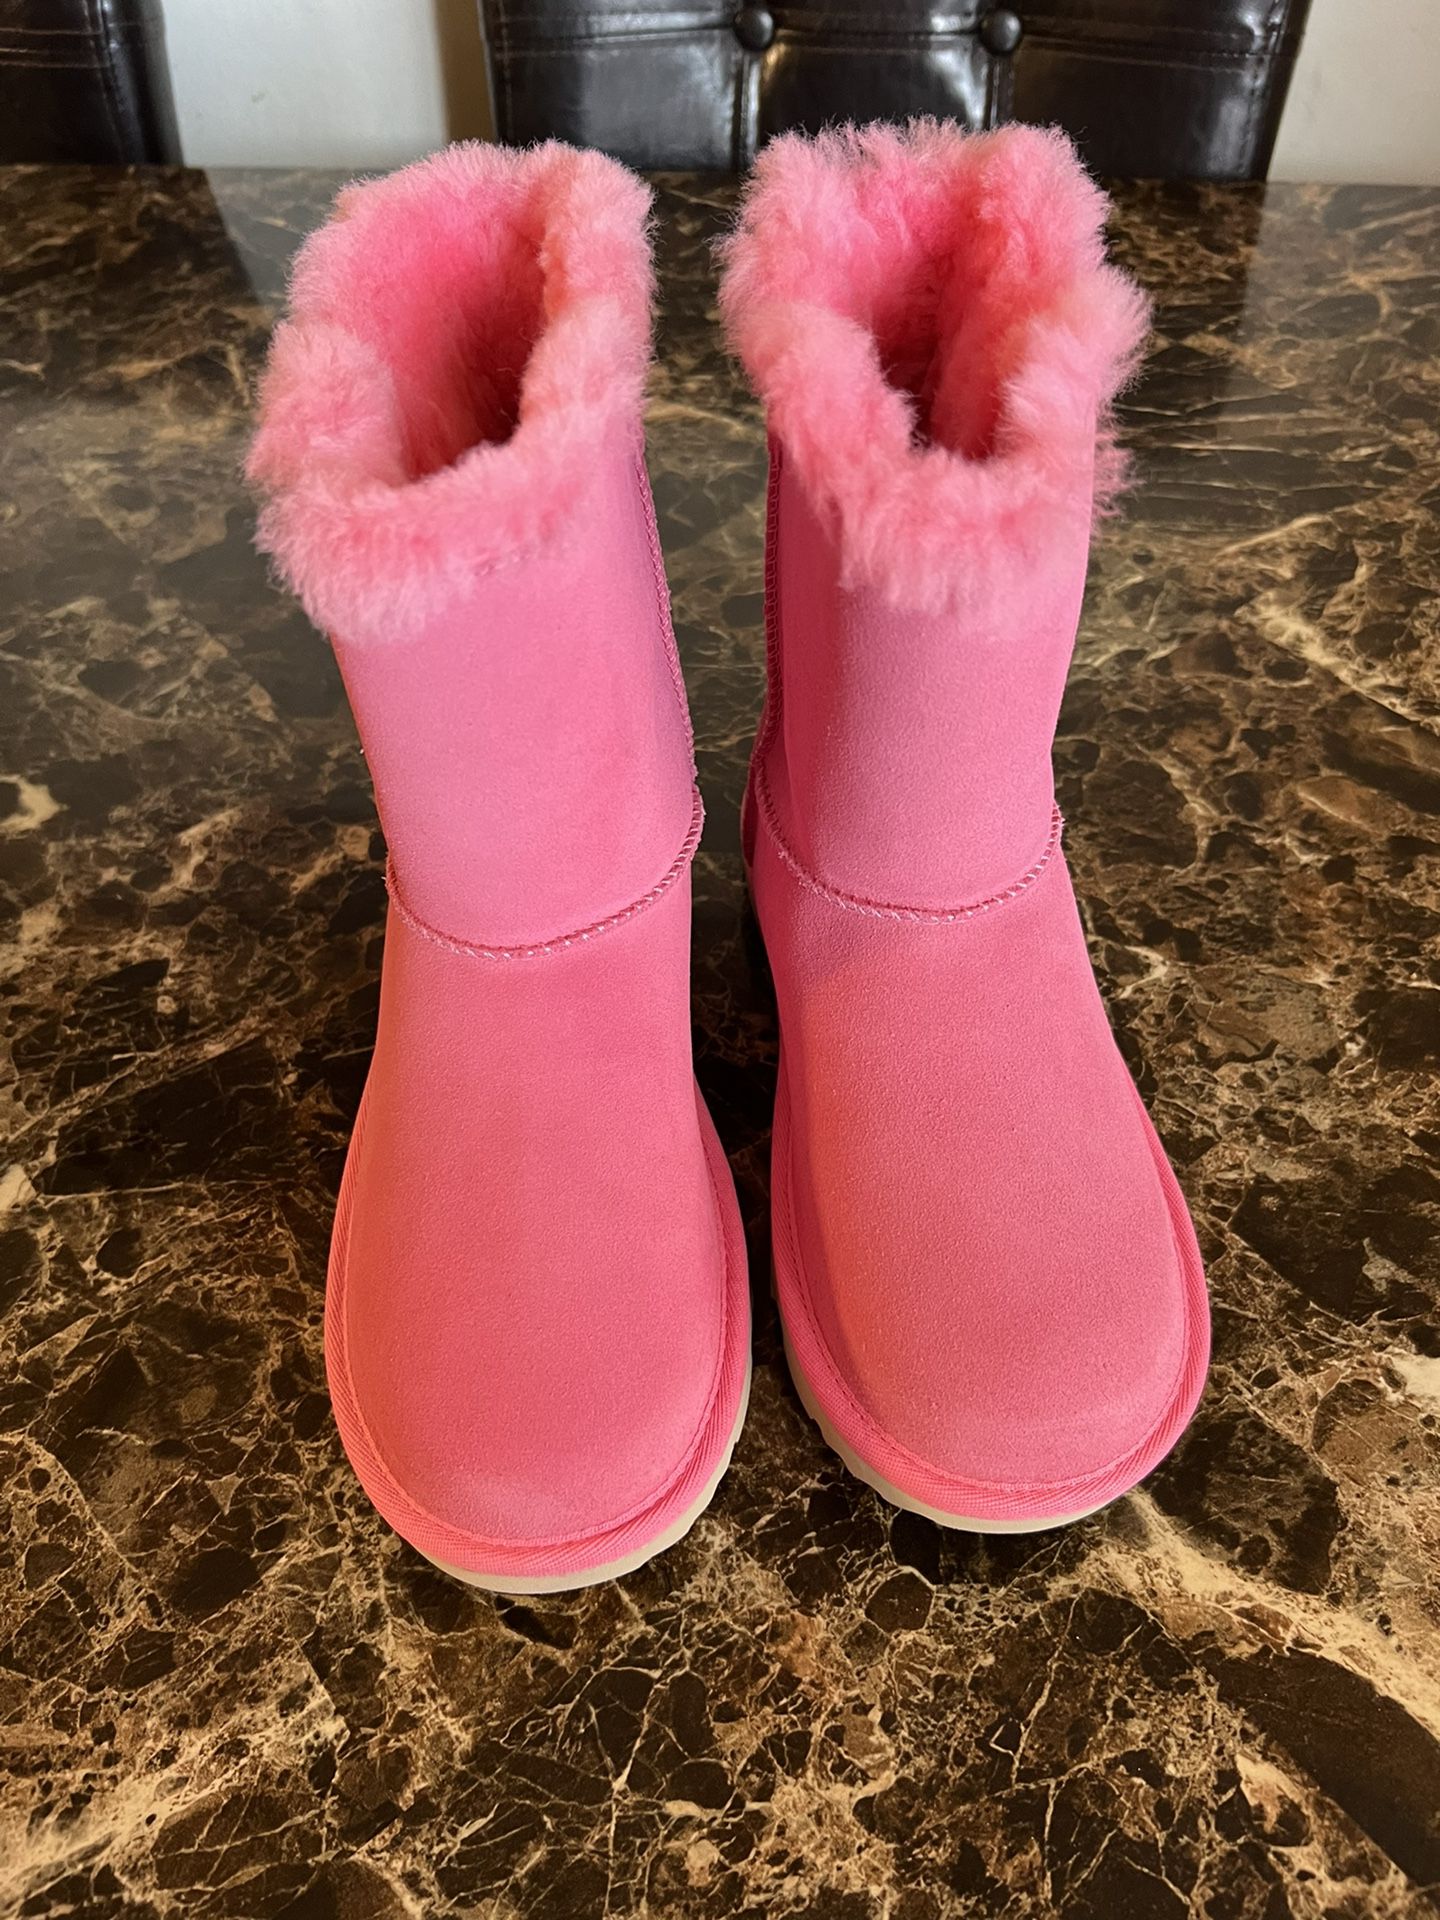 Pink Ugg Boots 